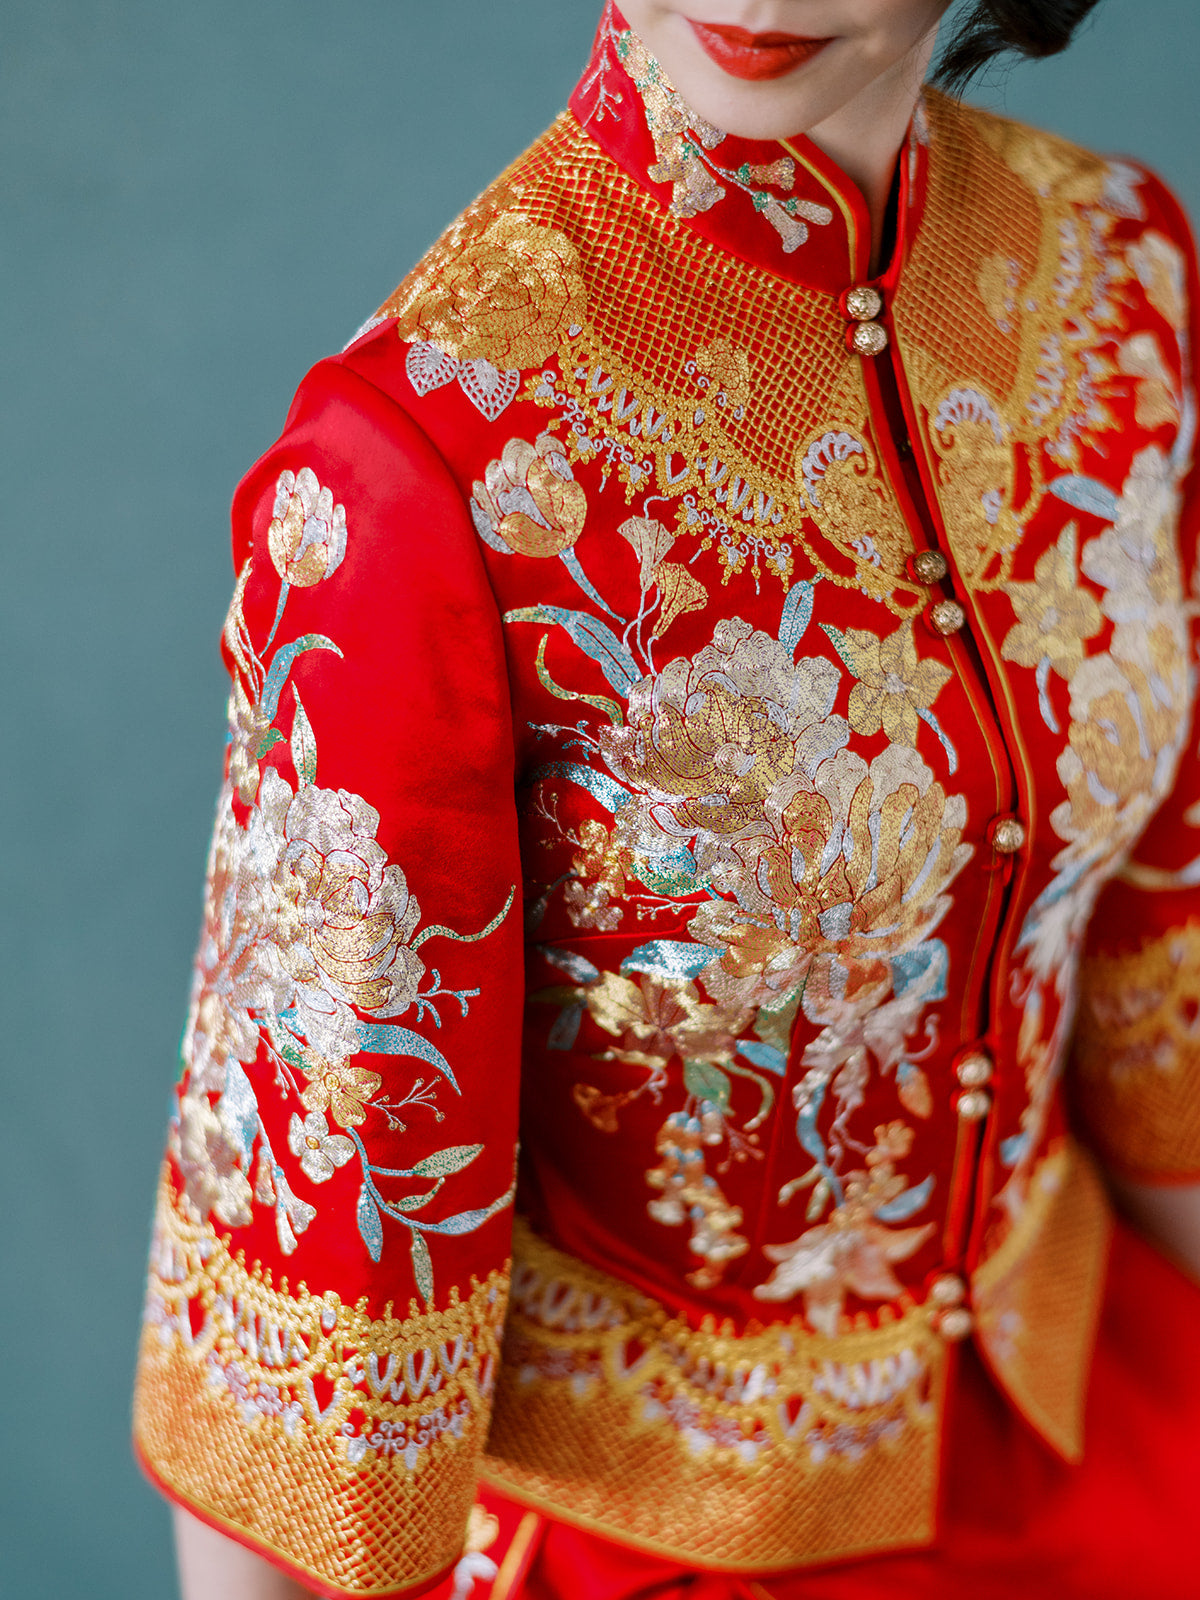 No.130 Traditional Chinese Wedding Dress by DreamMaker2010 on DeviantArt